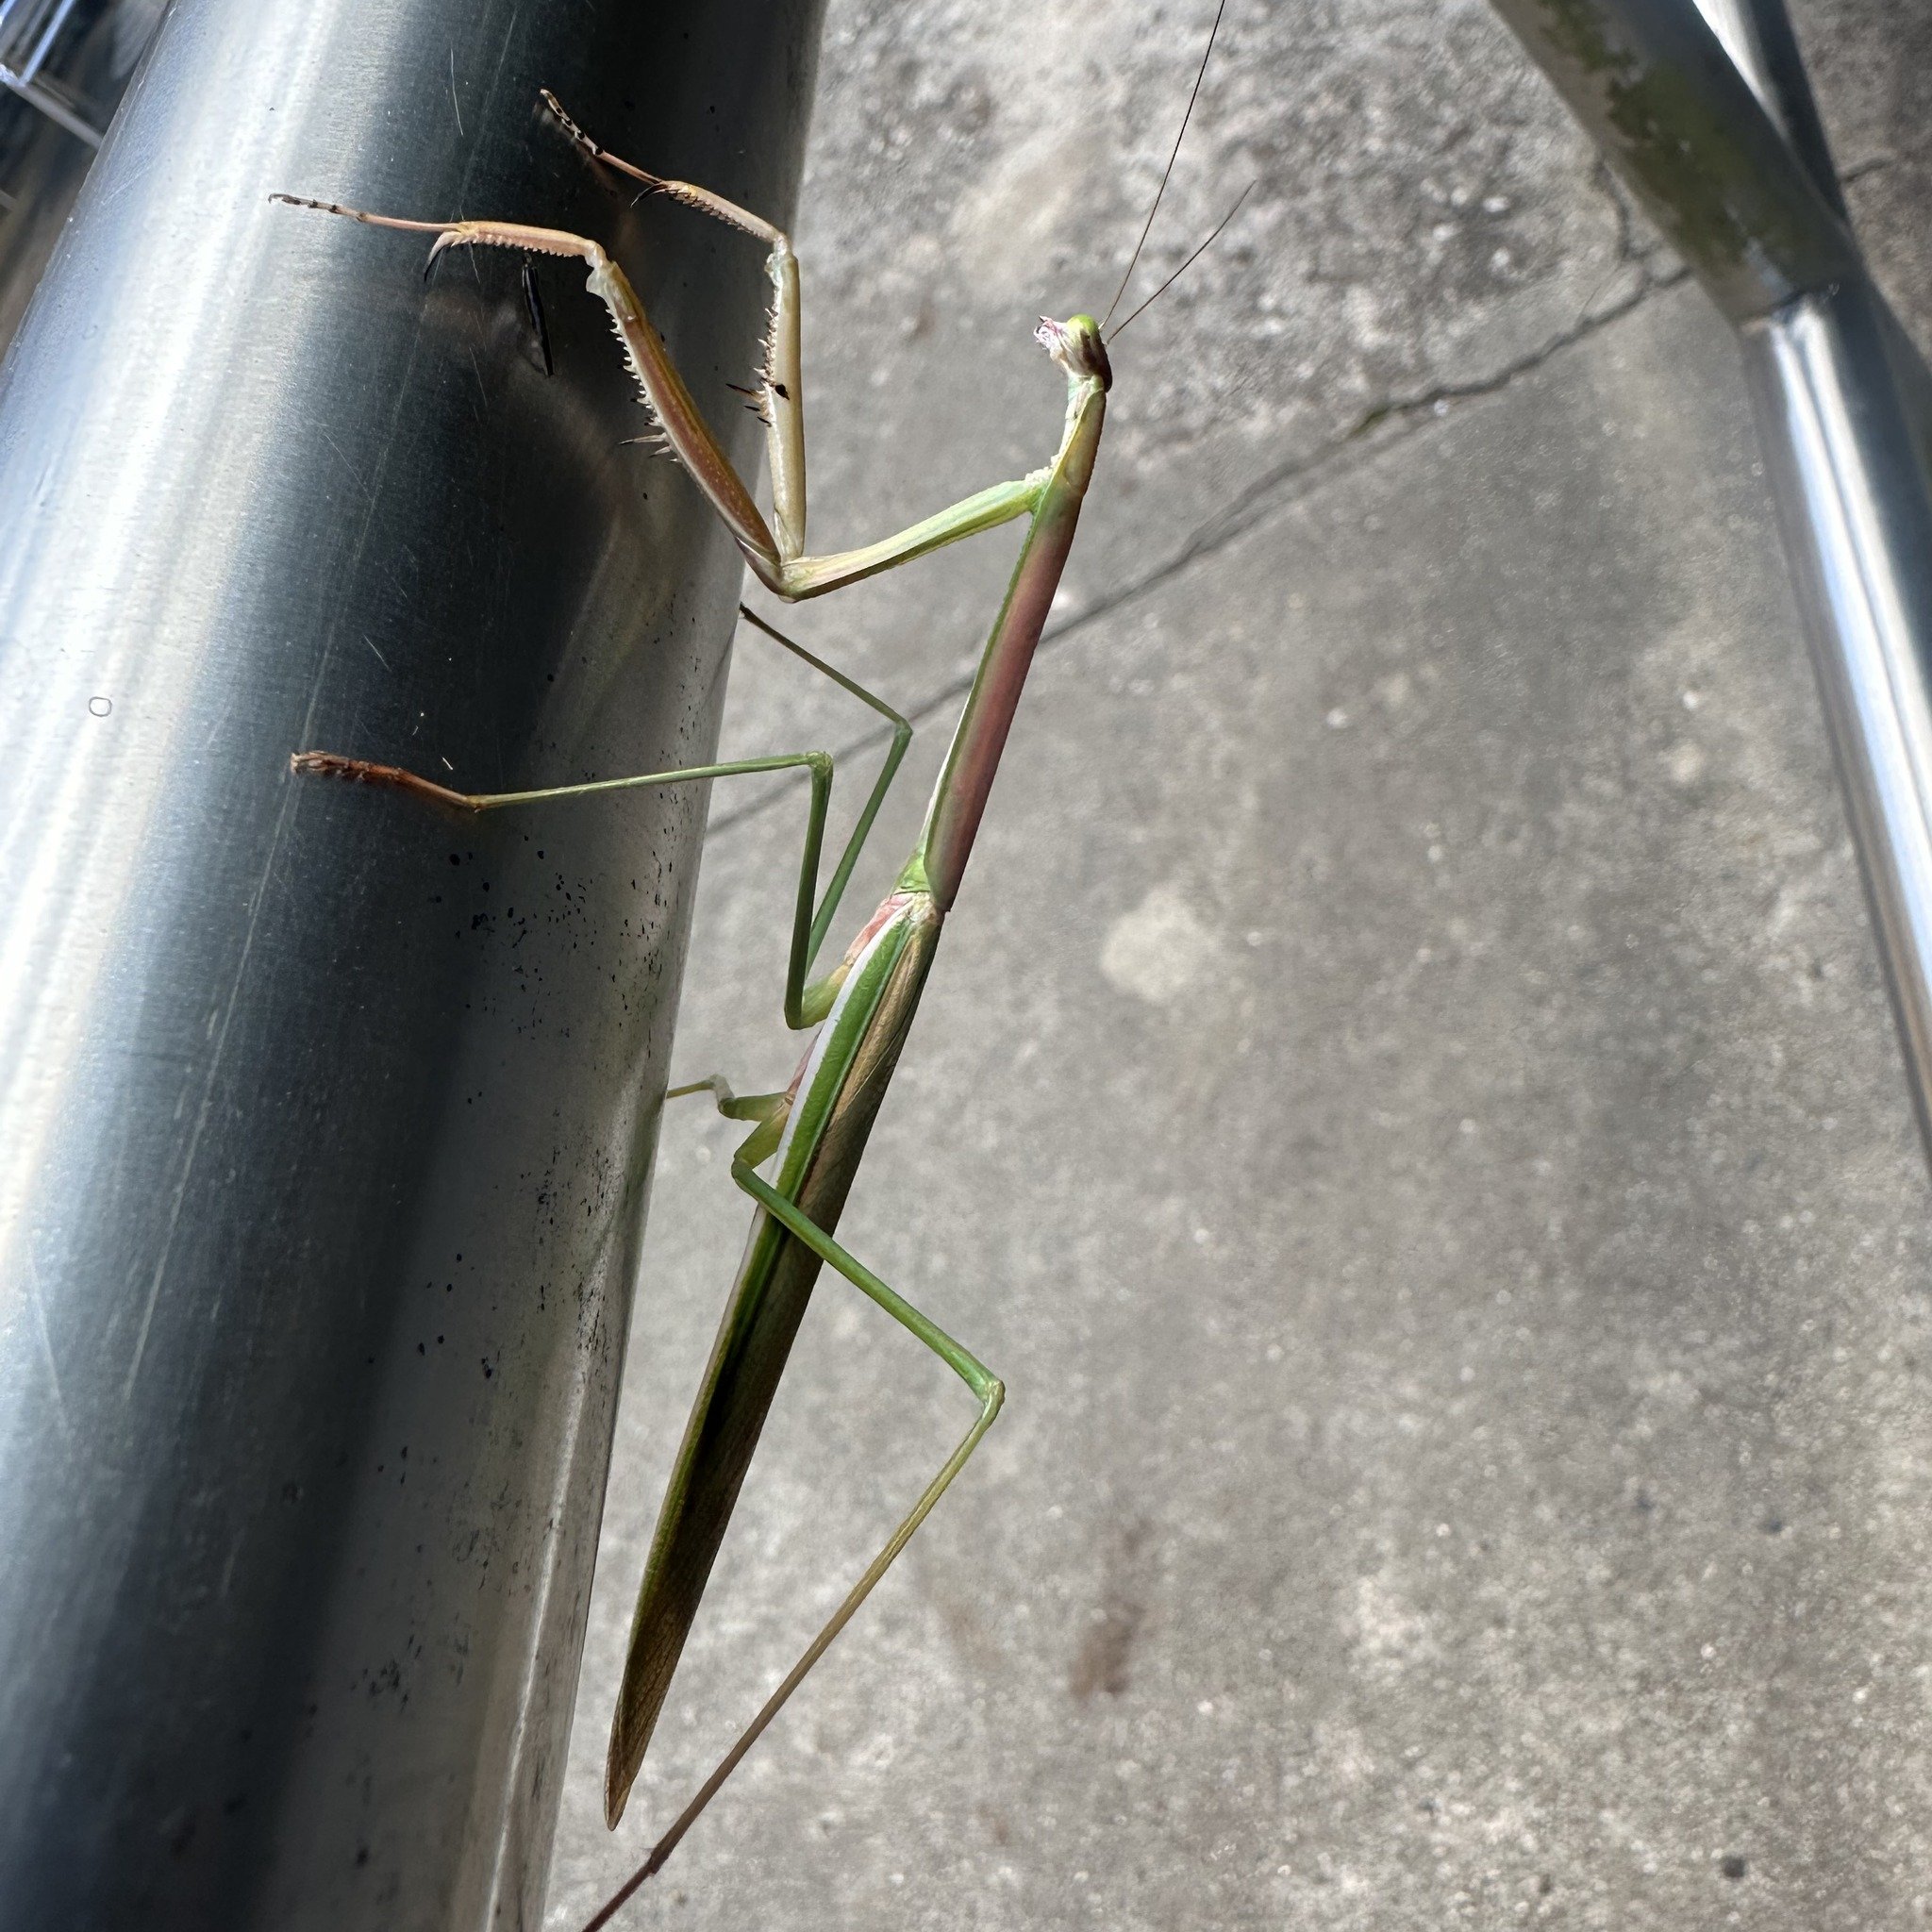 Wildlife Wednesday! While we're closed we're keeping a keen eye out for wildlife. This rather spectacular praying mantis, the Purple-winged Mantis (Tenodera australasiae) was seen sunning itself behind Caves House &ndash; possibly the first time we'v